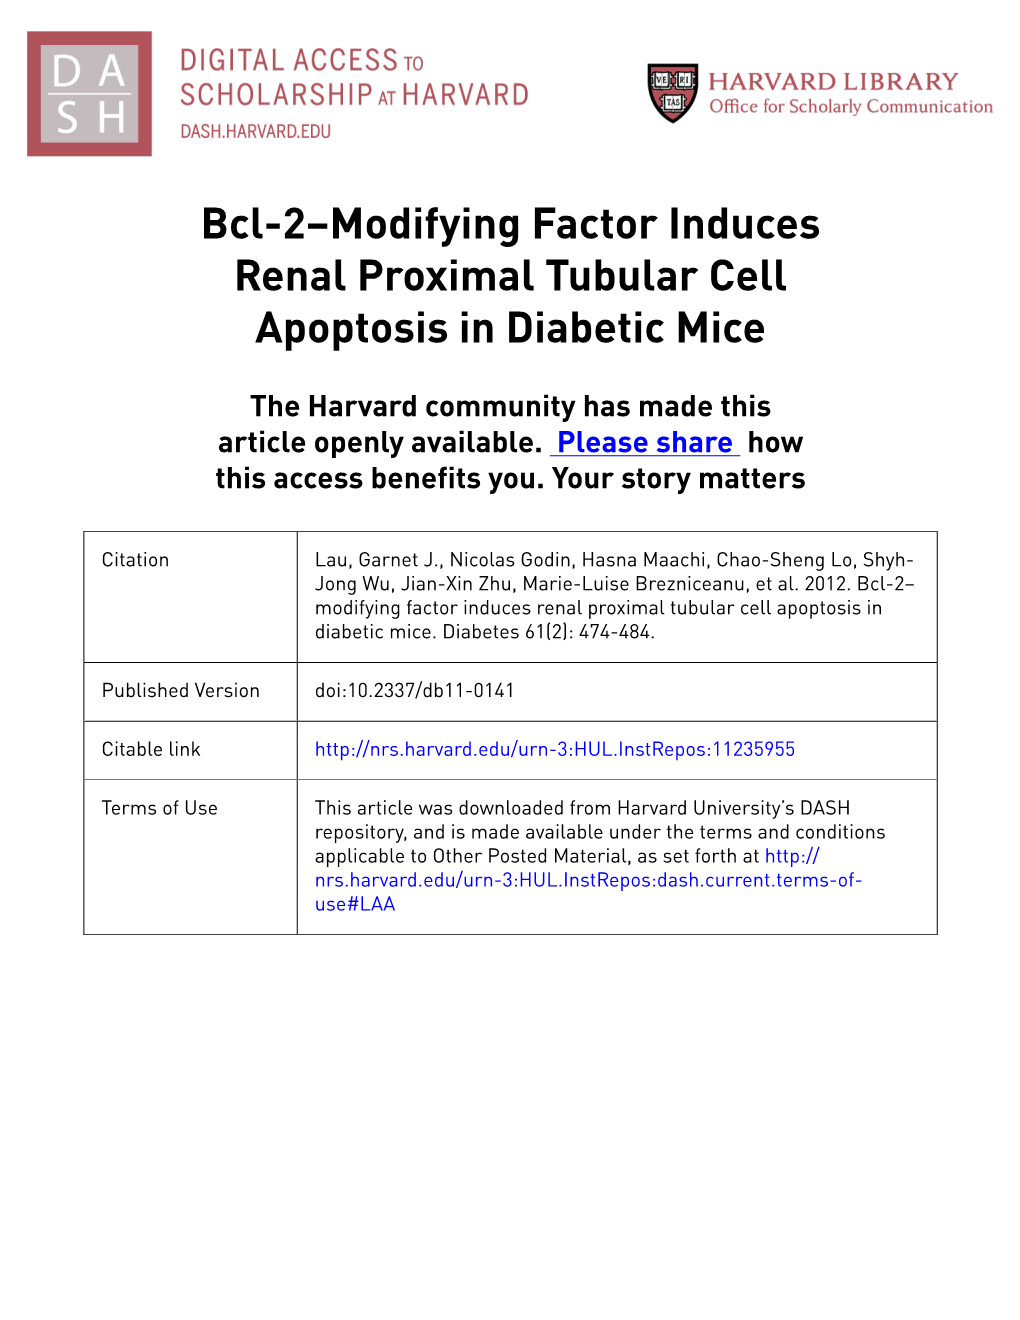 Bcl-2–Modifying Factor Induces Renal Proximal Tubular Cell Apoptosis in Diabetic Mice